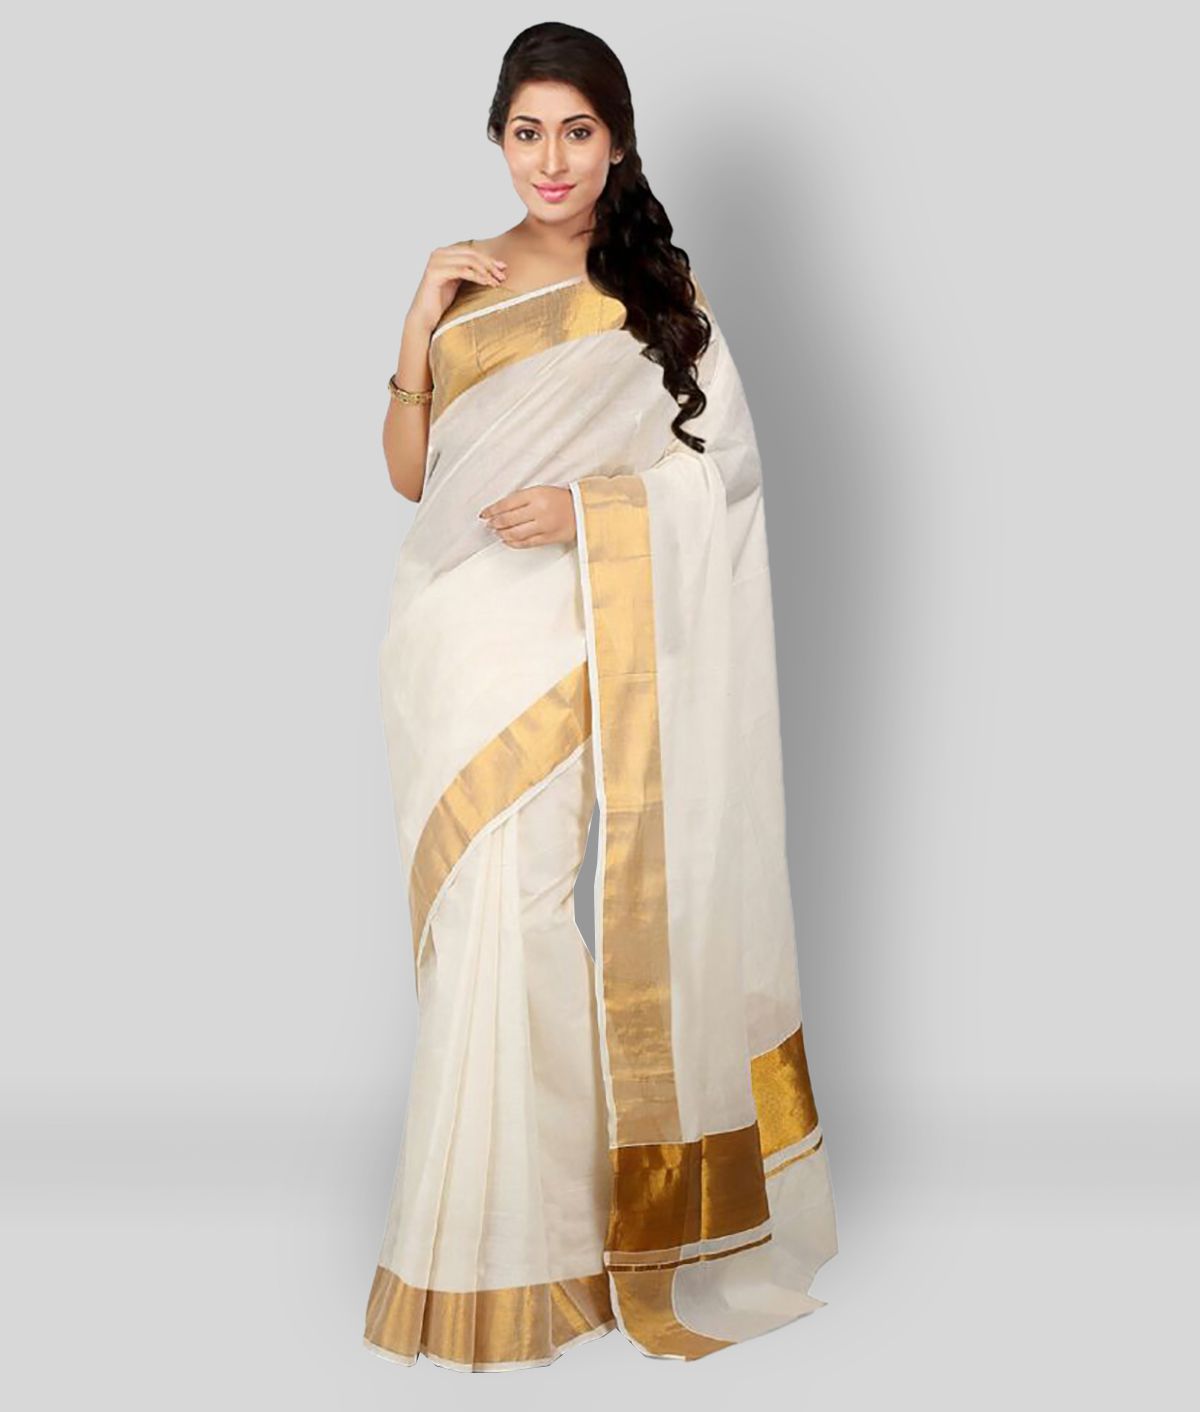     			Selvamani Tex - White Cotton Blend Saree With Blouse Piece ( Pack of 1 )